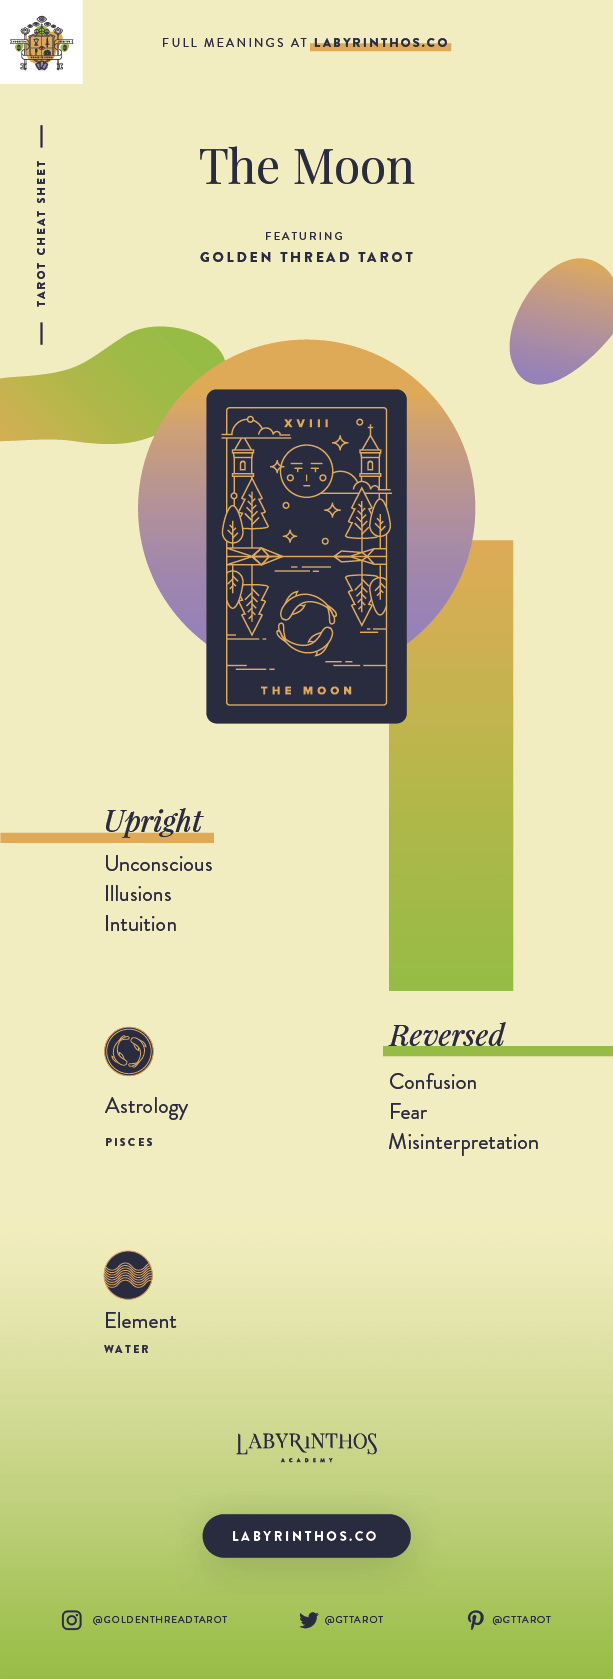 The Moon Meaning - Tarot Card Meanings Cheat Sheet